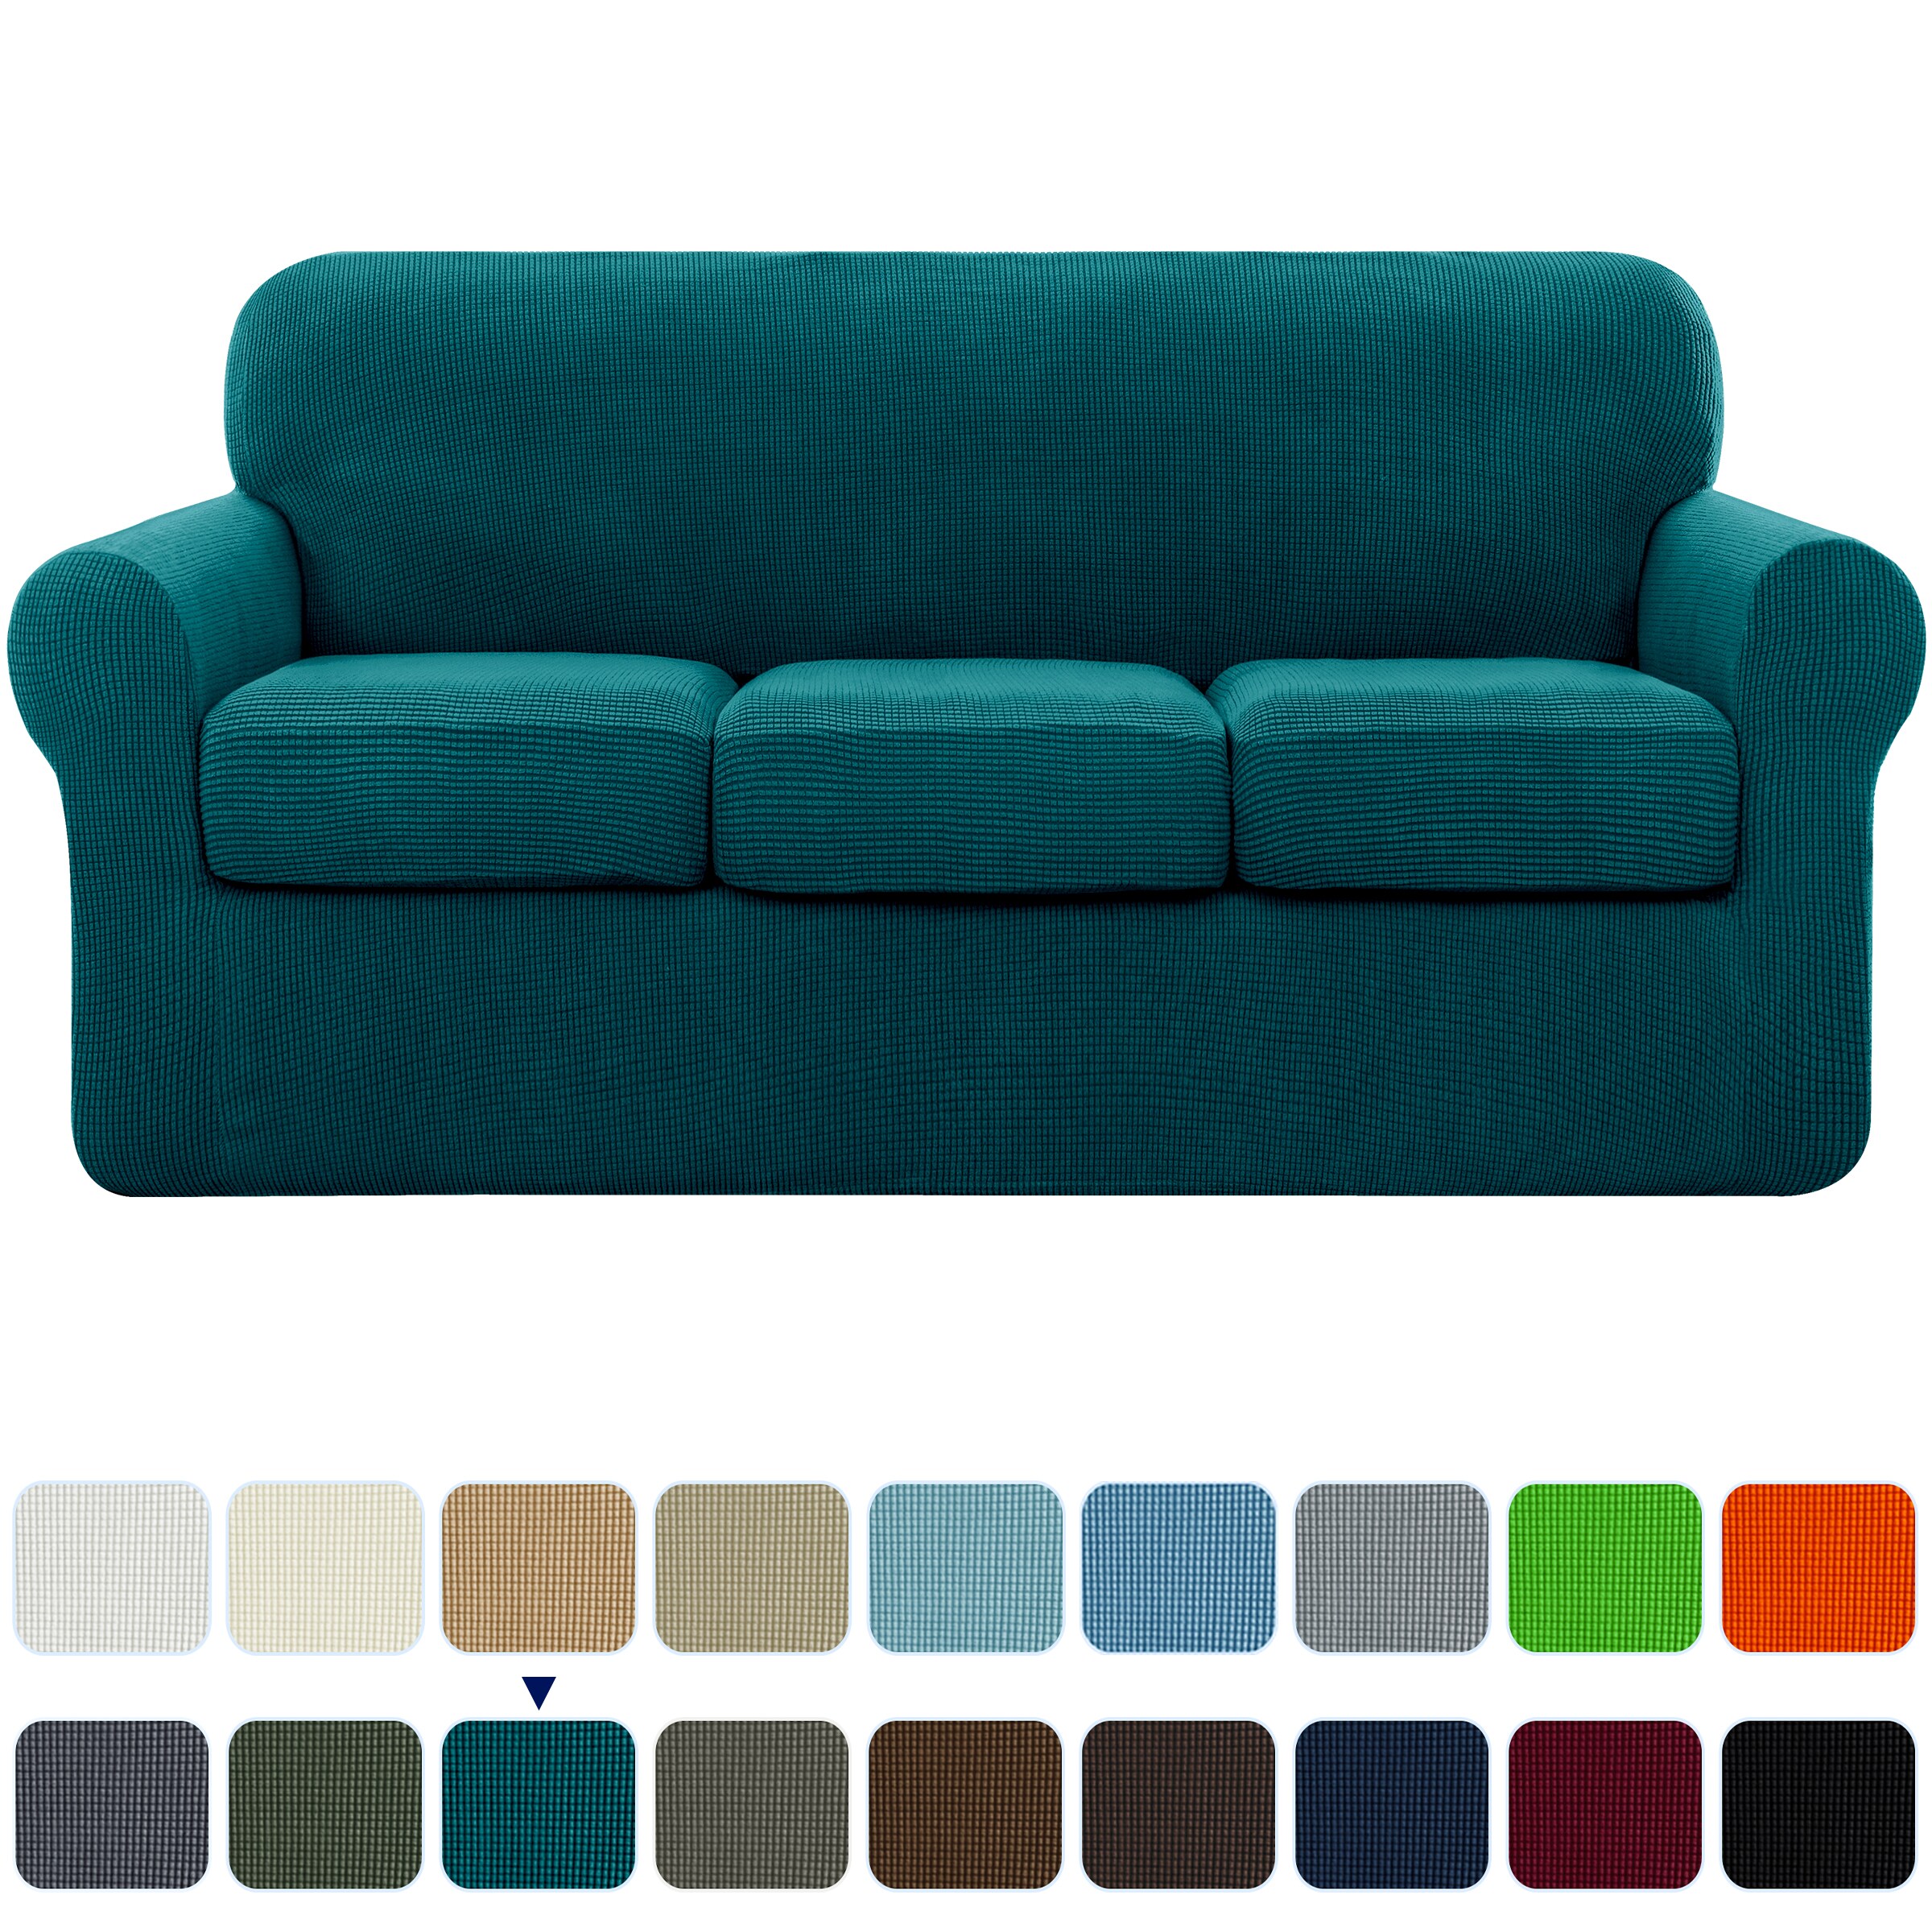 subrtex Jacquard Stretch Sofa Cover Polyester Fabric Slipcovers for Couch Recliner Armchair 3 Seaters, Teal